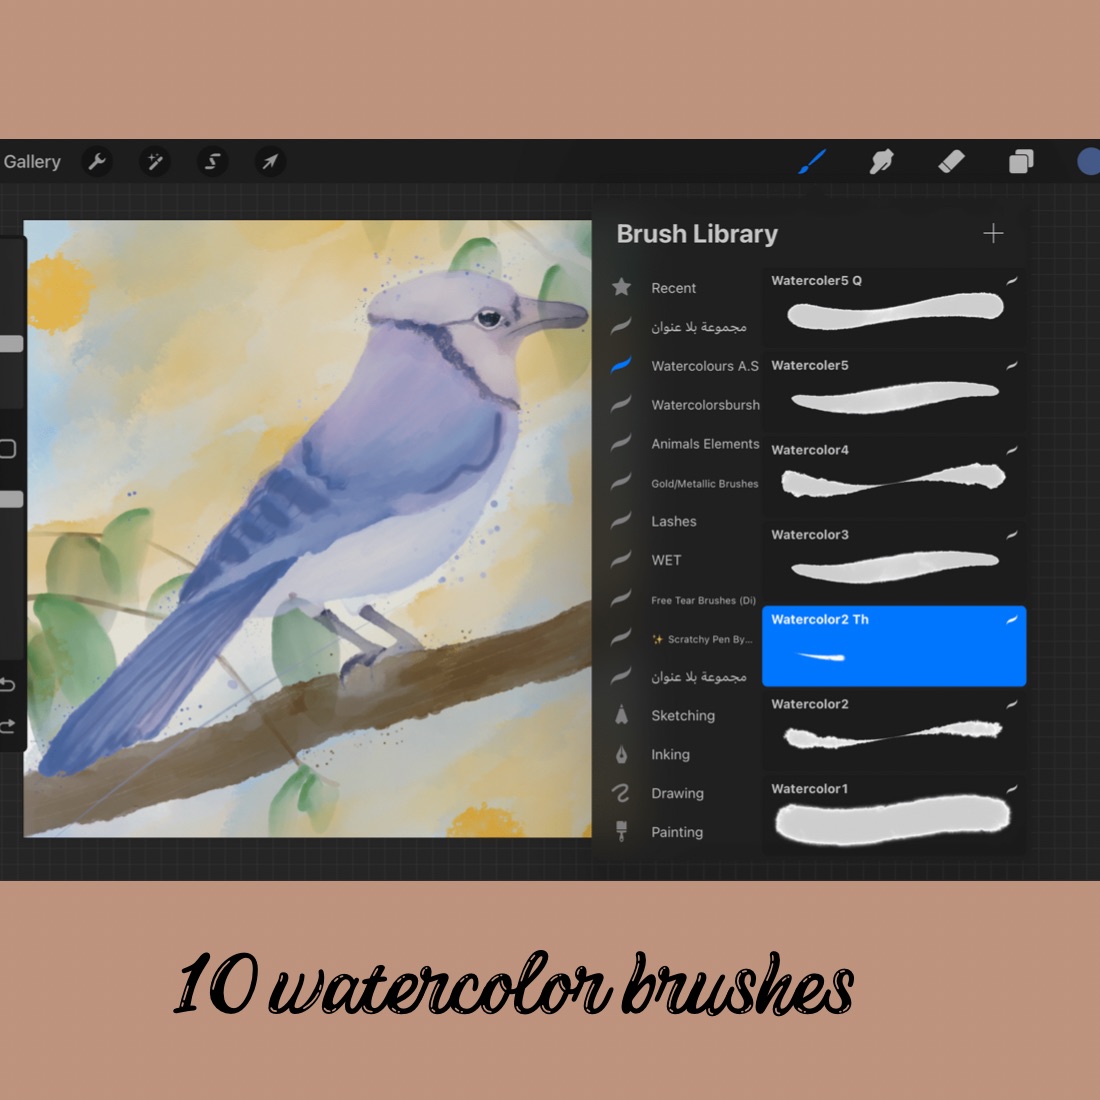 You will get 10 watercolor brushes.